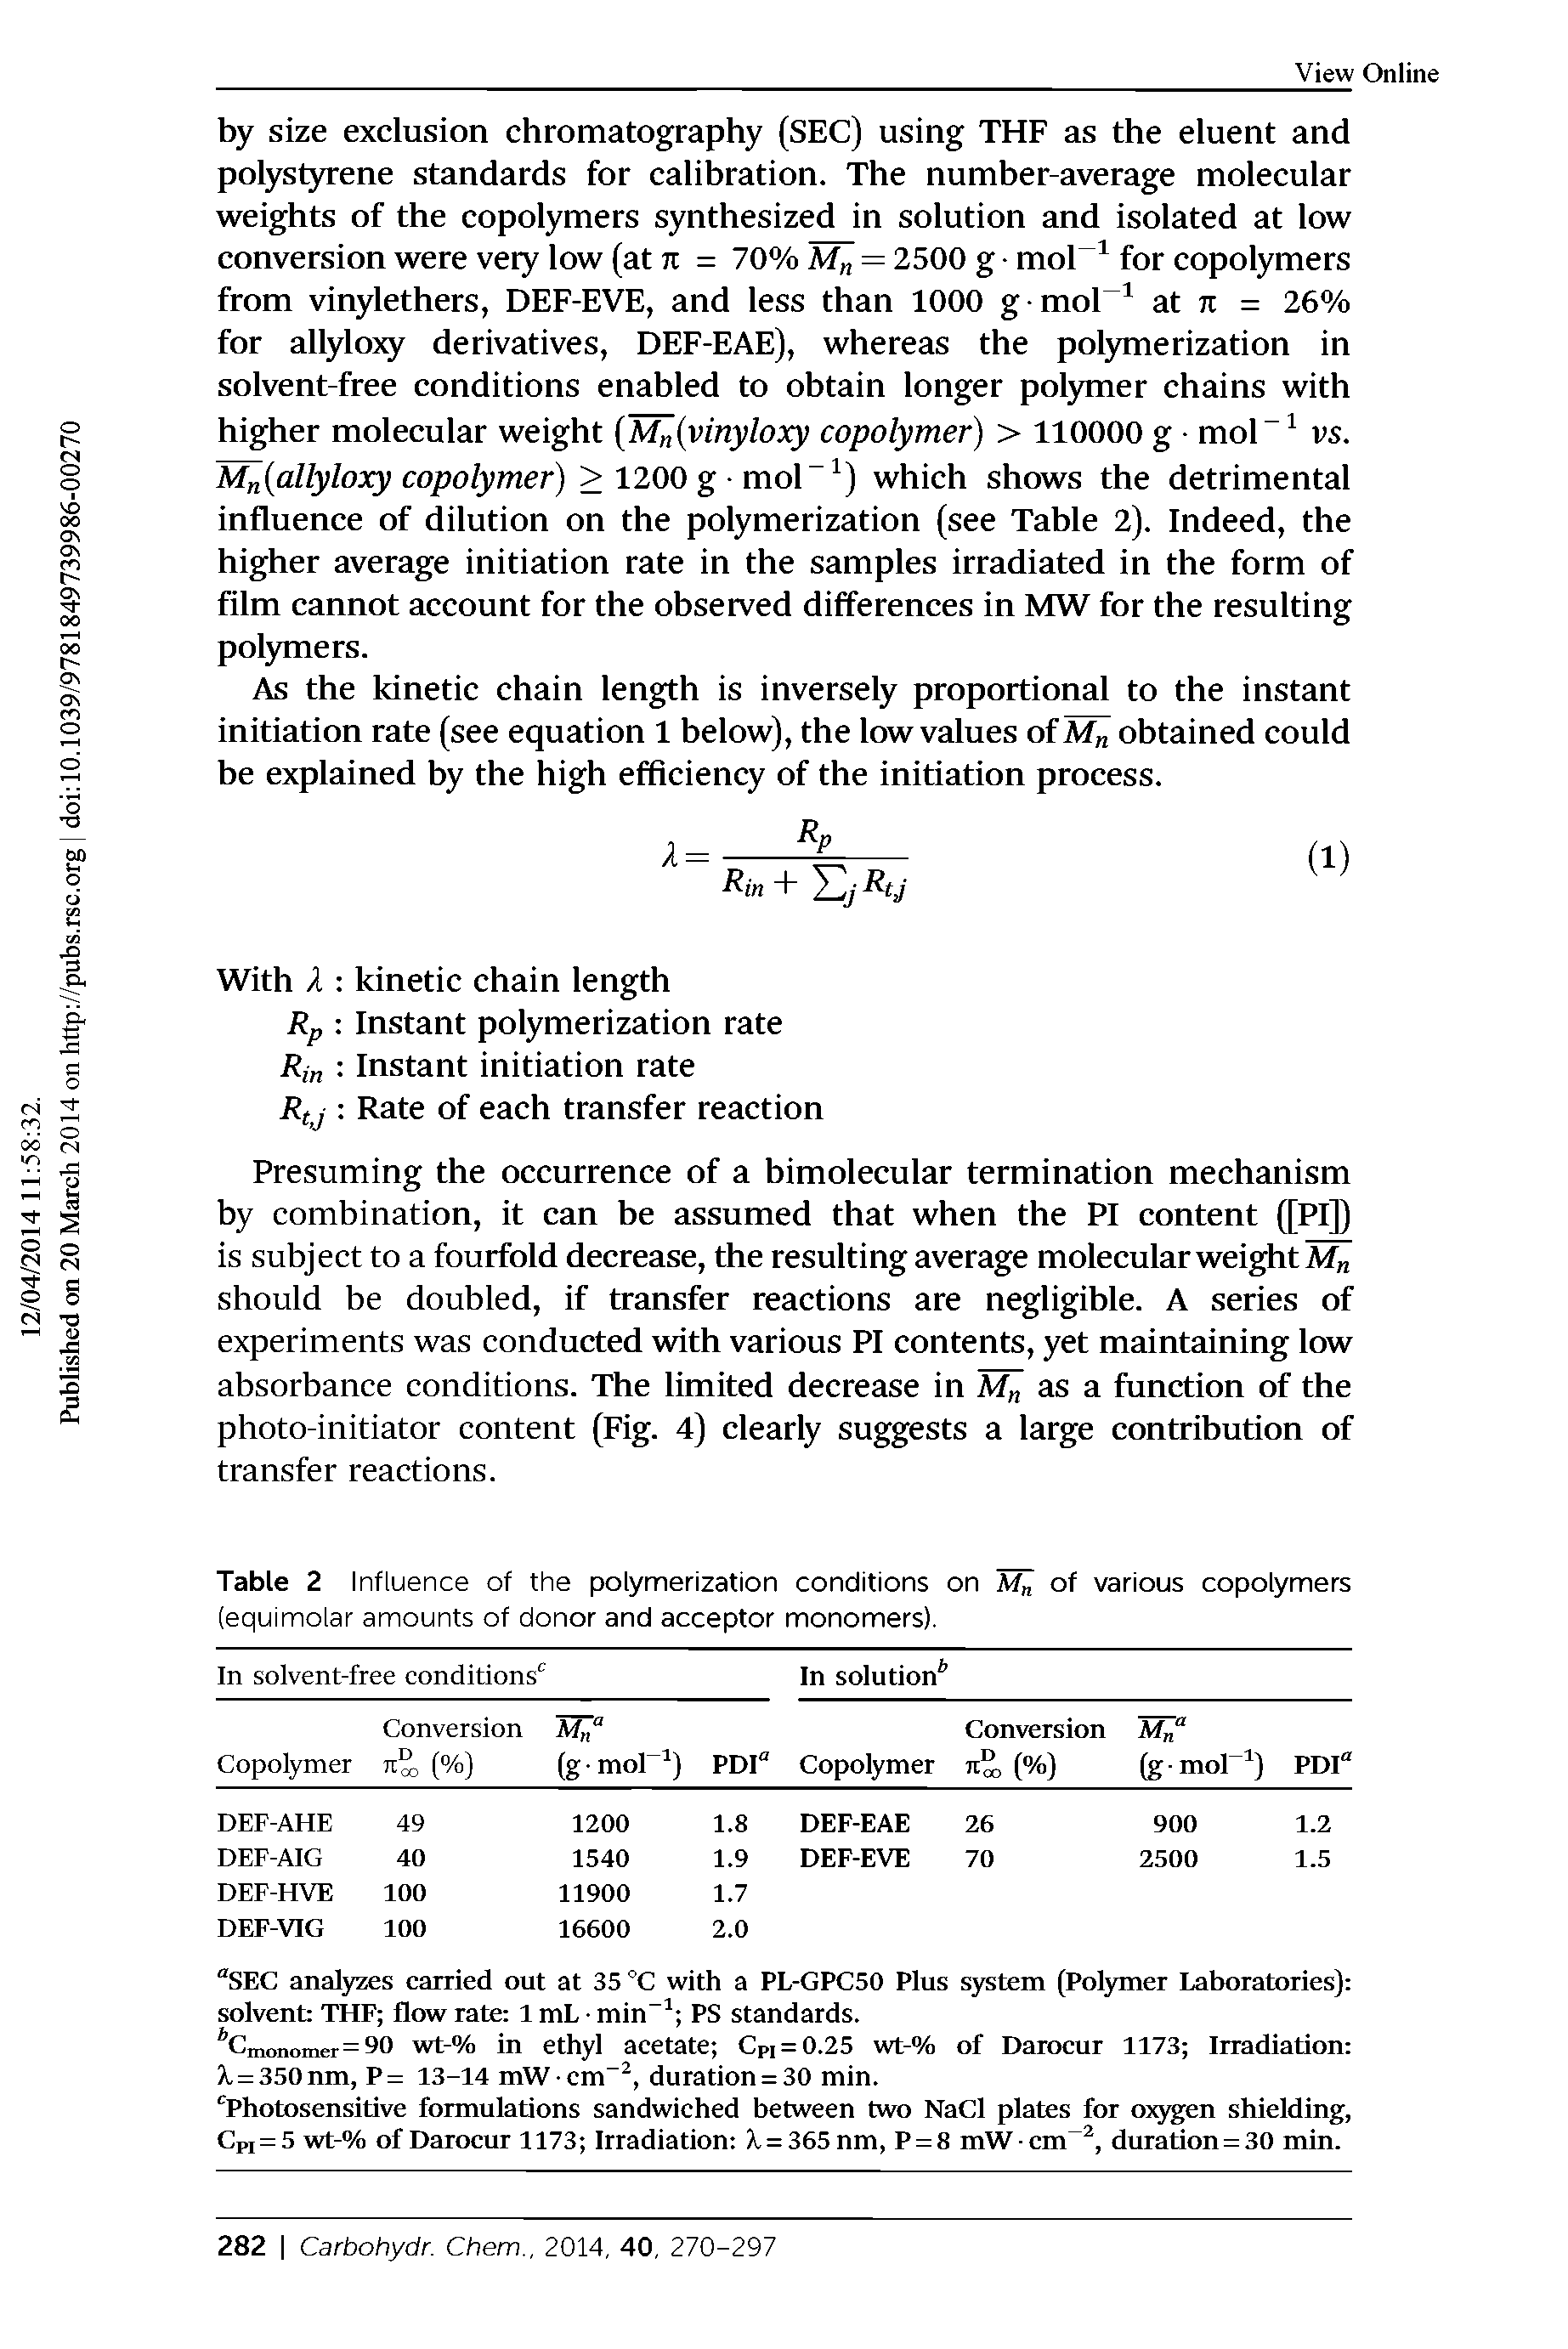 Table 2 Influence of the polymerization conditions on M of various copolymers (equimolar amounts of donor and acceptor monomers).